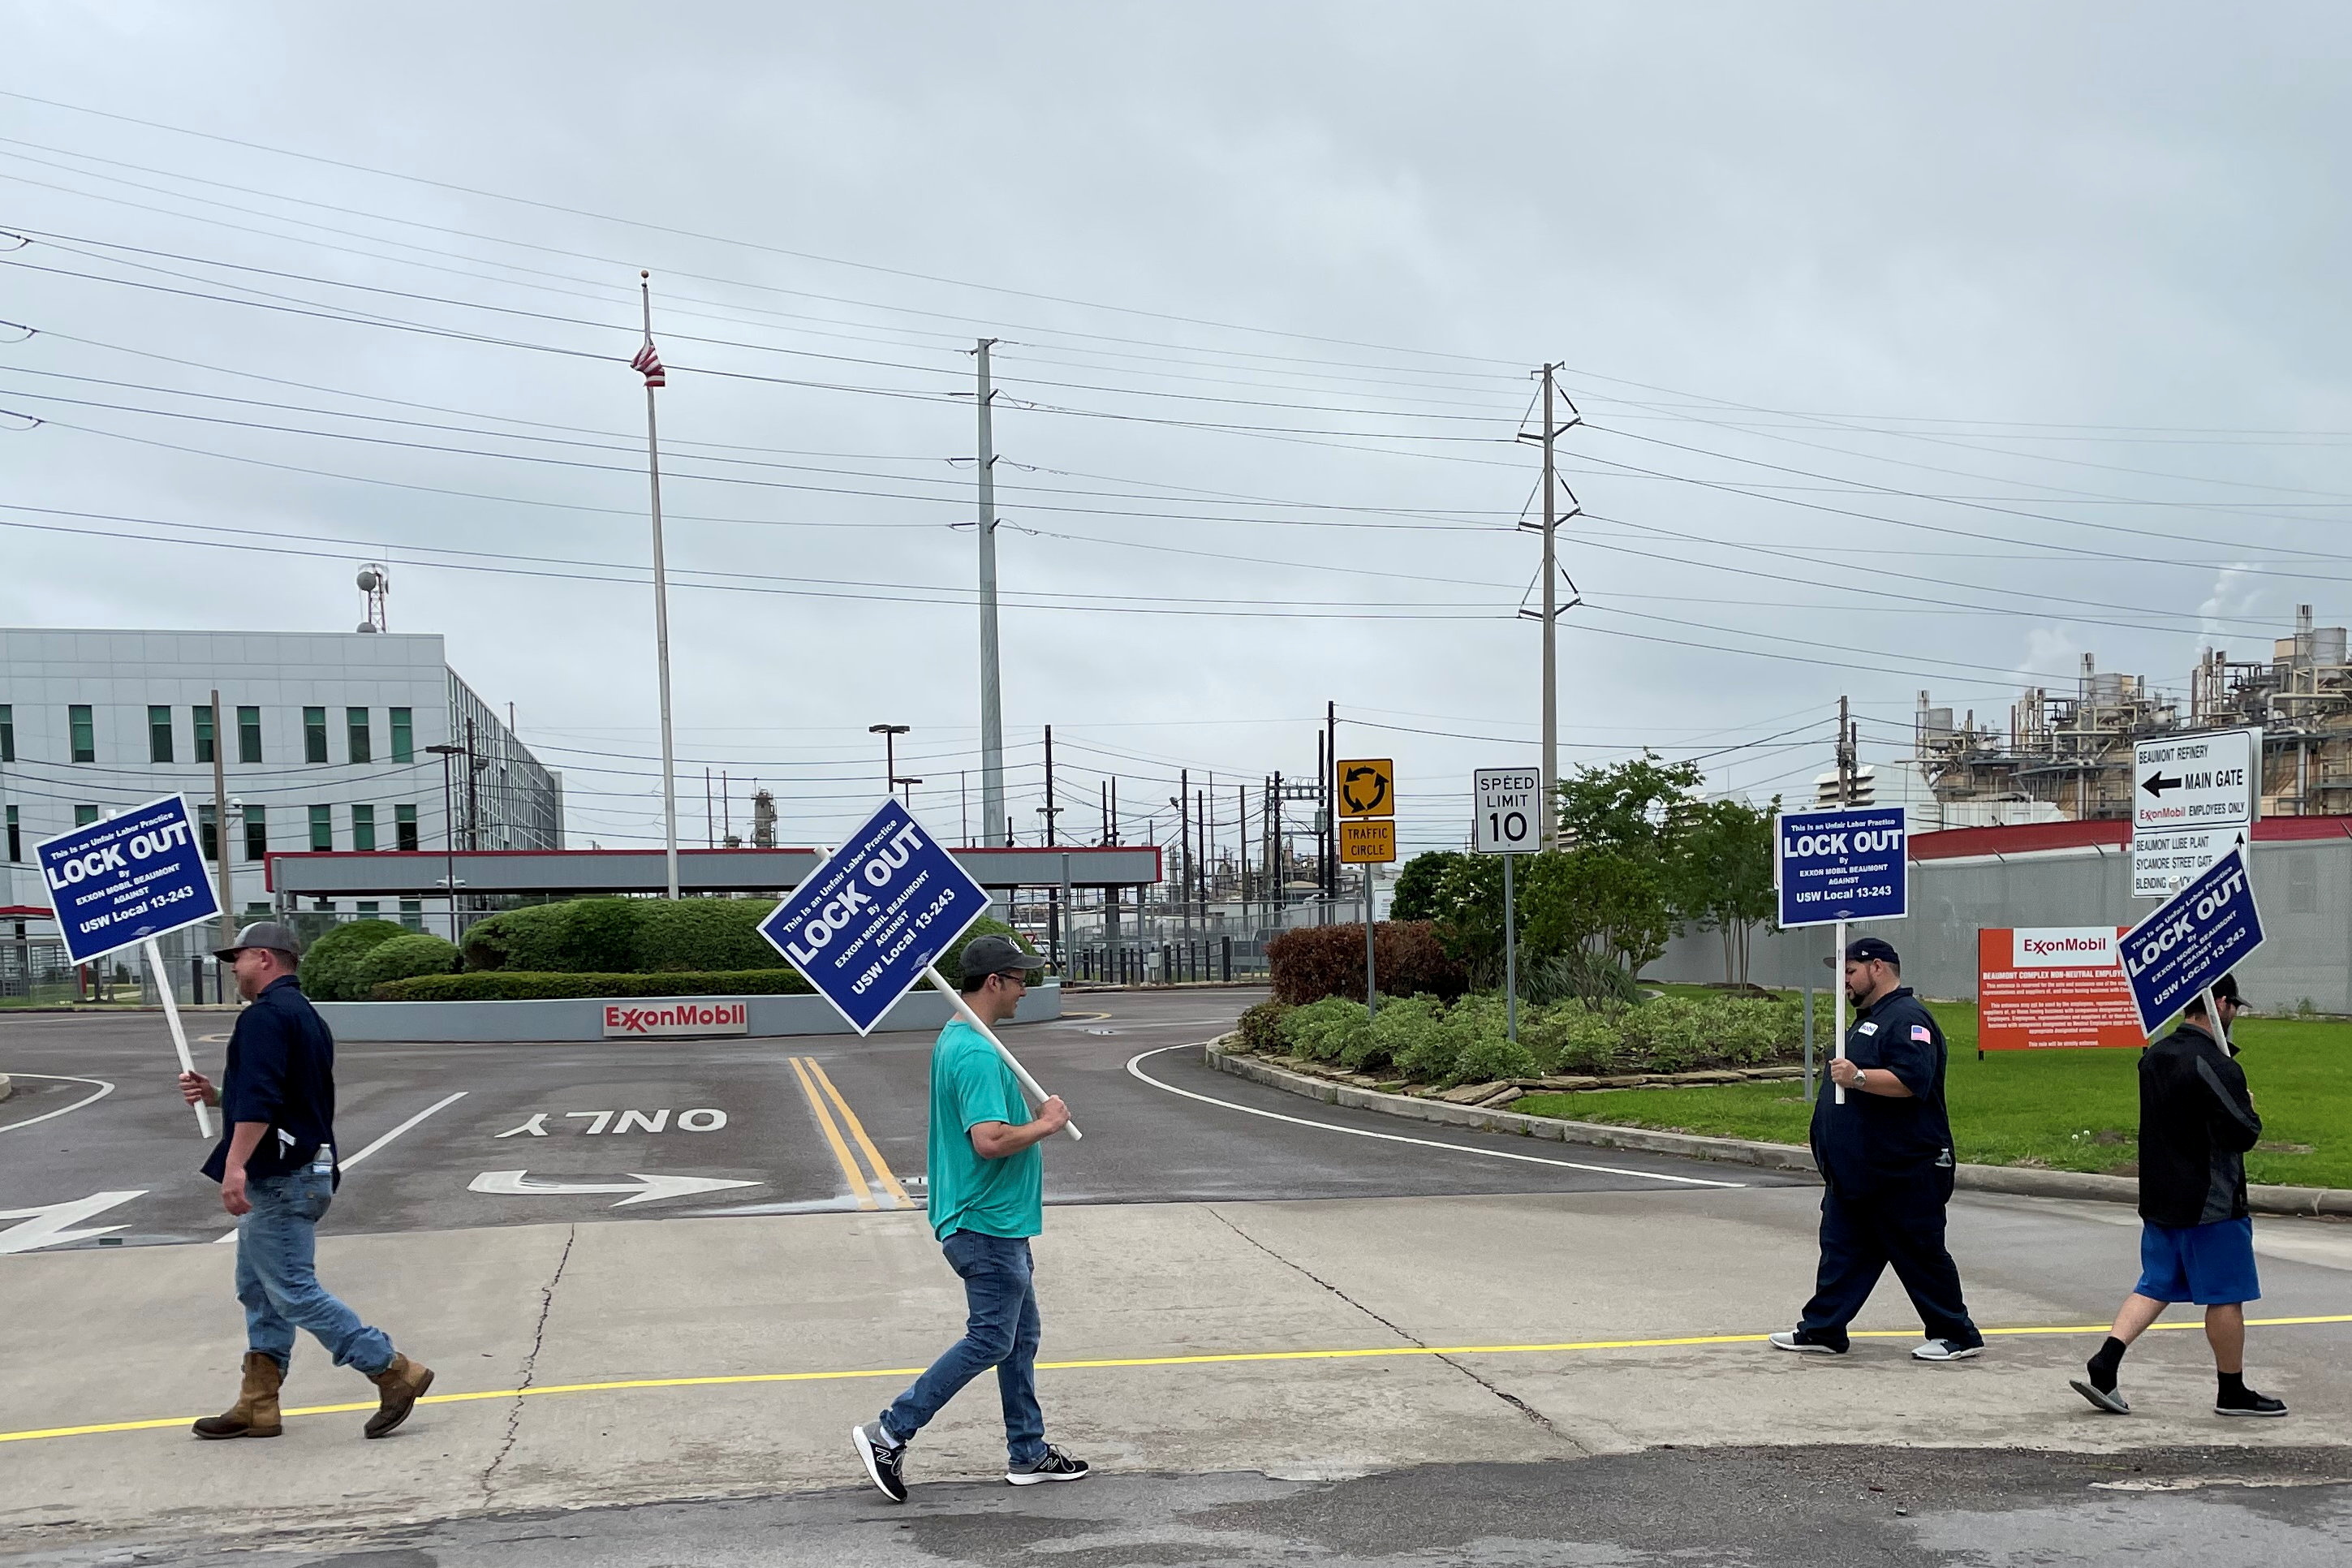 United Steelworkers (USW) union members picket outside Exxon Mobil's oil refinery amid a contract dispute in Beaumont, Texas, U.S., May 1, 2021. Exxon locked out the plant's about 650 union-represented employees citing fears of a strike.  REUTERS/Erwin Seba 